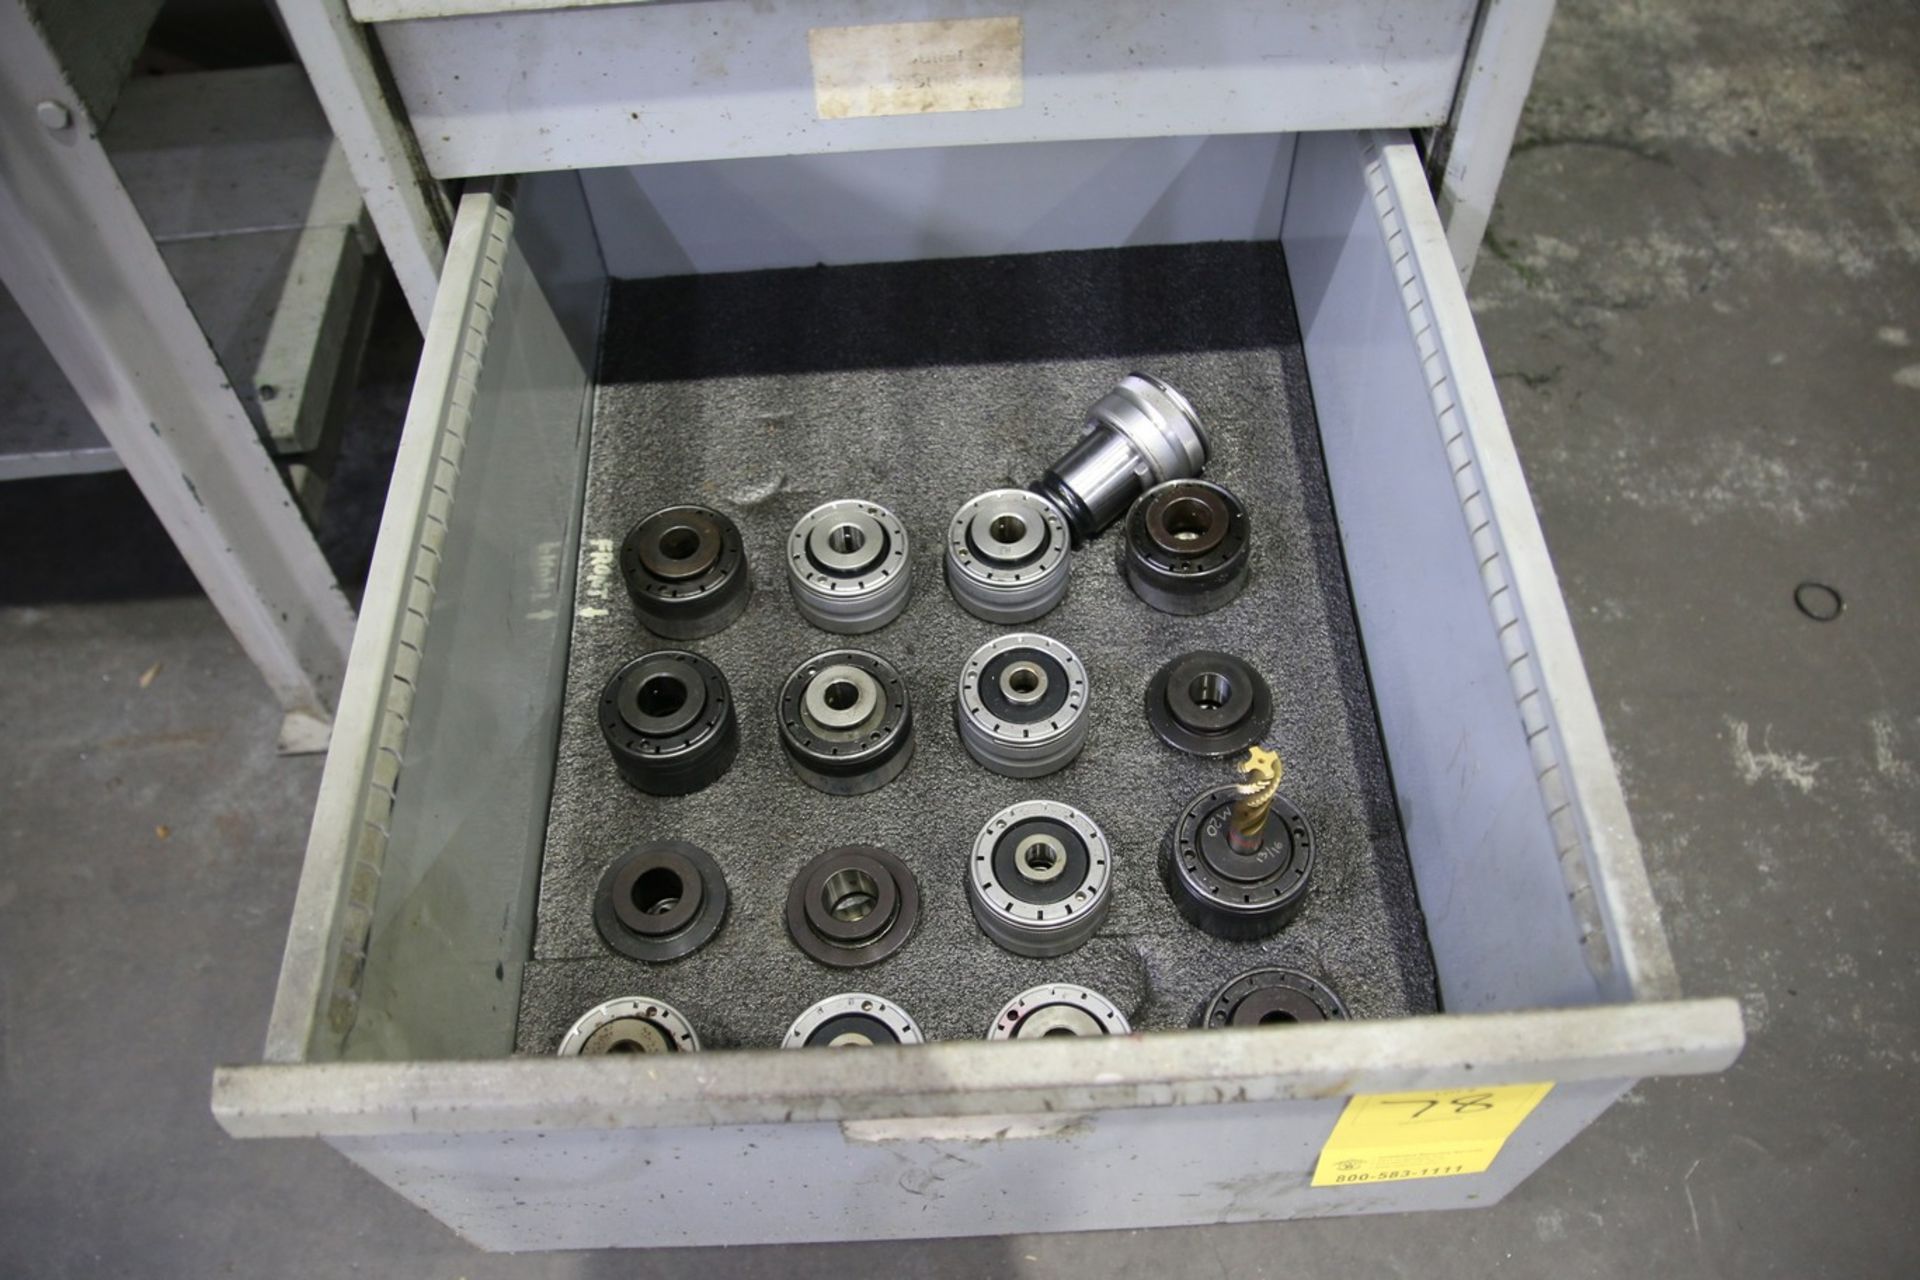 Rolling Metal Cabinet with Contents Contents Include Fixture Pucks, Drill Bodies, Taps, Drills, - Image 6 of 6